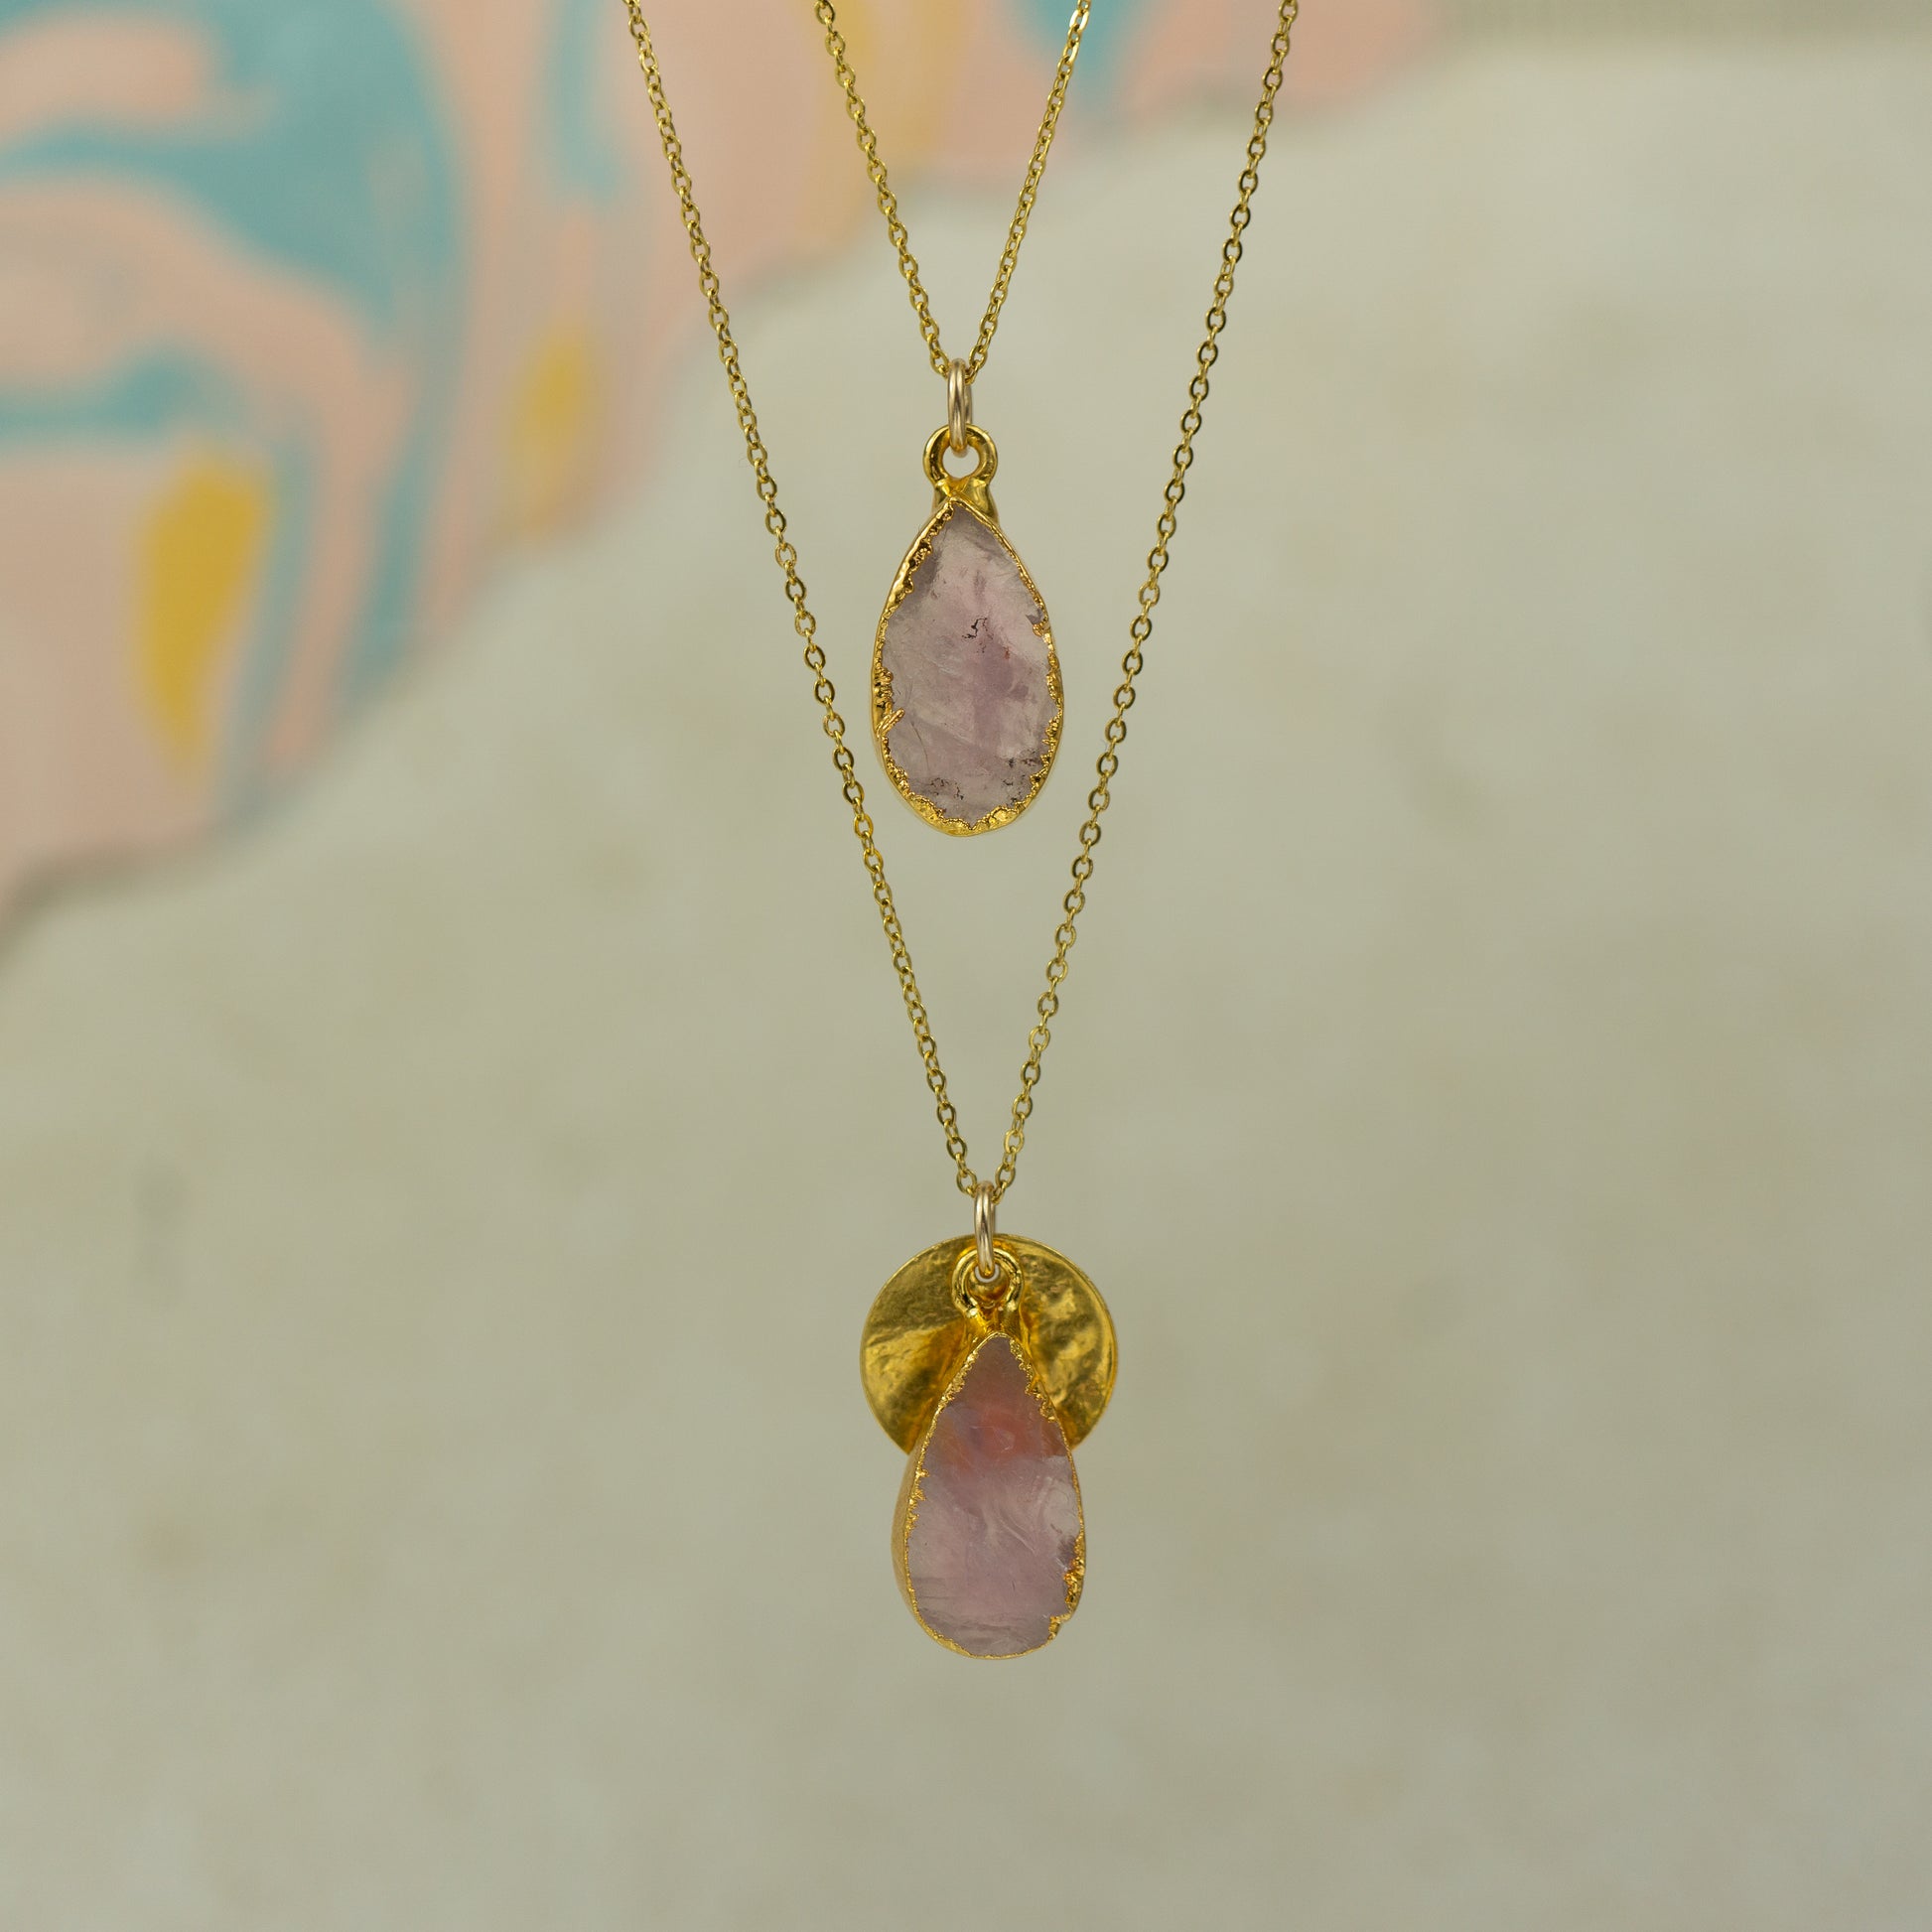 single teardrop raw pink rose quartz pendants finished in gold on a chains.